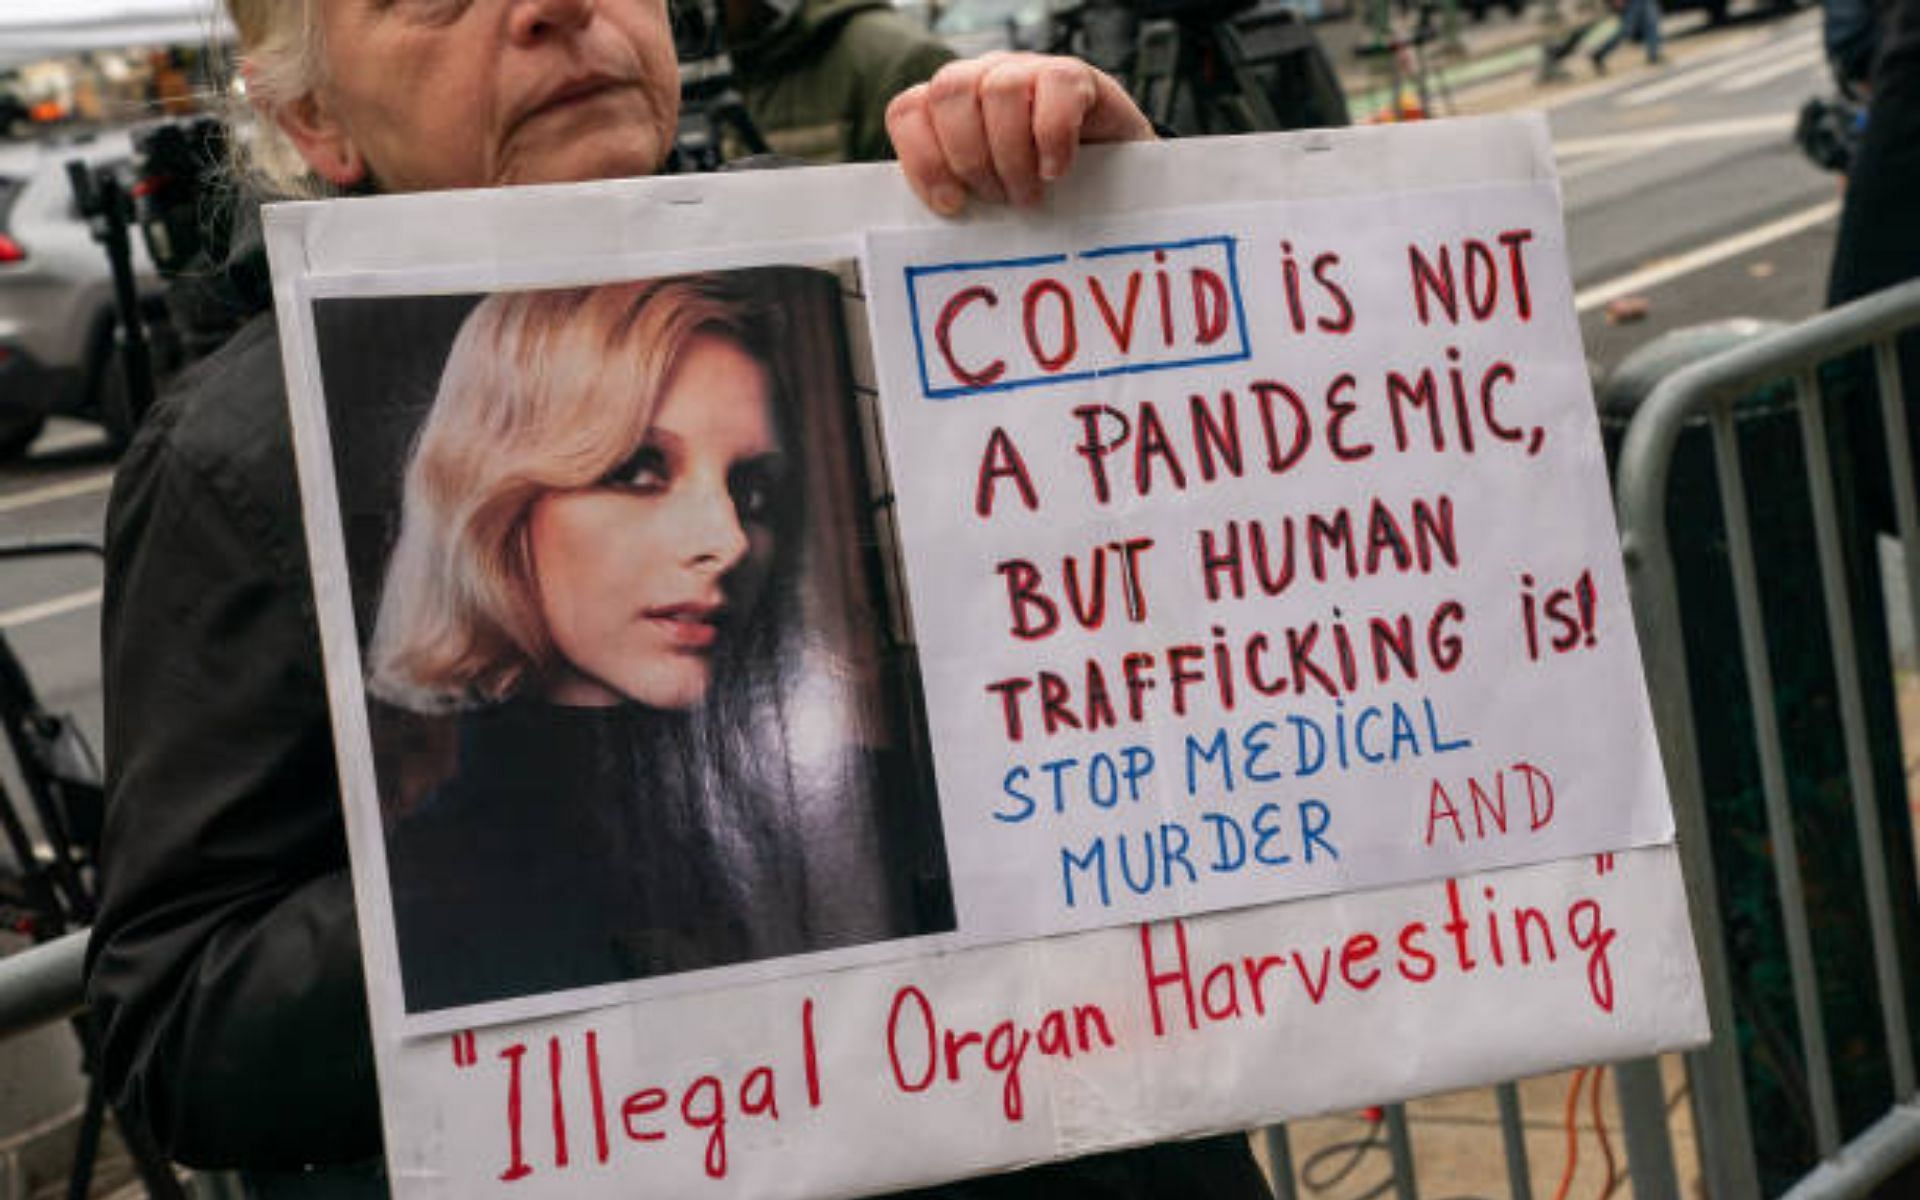 People protesting at the Thurgood Marshall United States Courthouse where the trial of Ghislaine Maxwell was held in November 2021 in New York City (Image via David Dee Delgado/Getty Images)